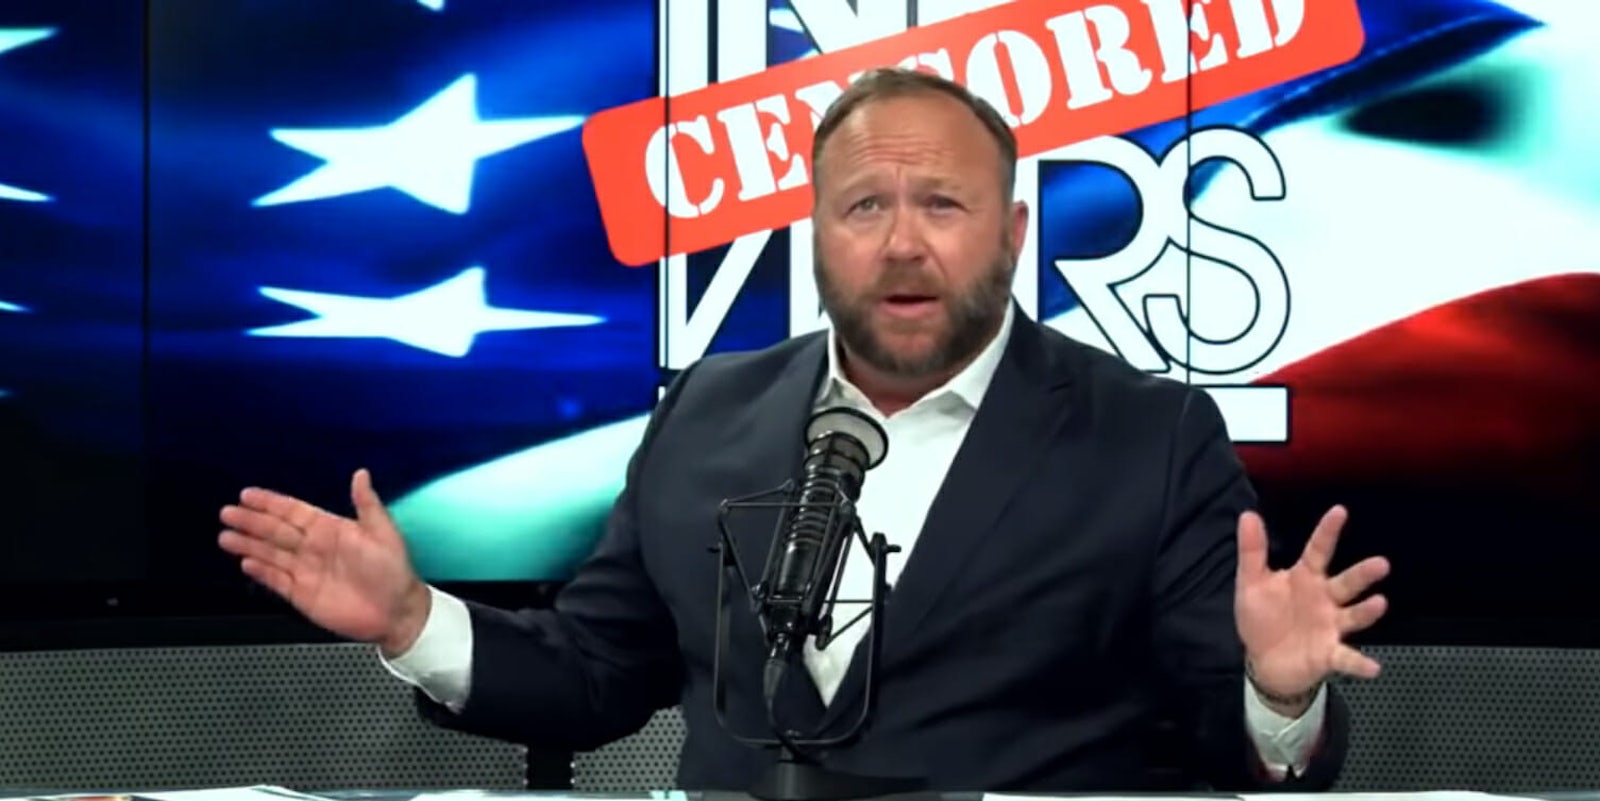 Spotify, the music streaming app, has removed 'specific episodes' of InfoWars host Alex Jones's podcast, according to a new report.